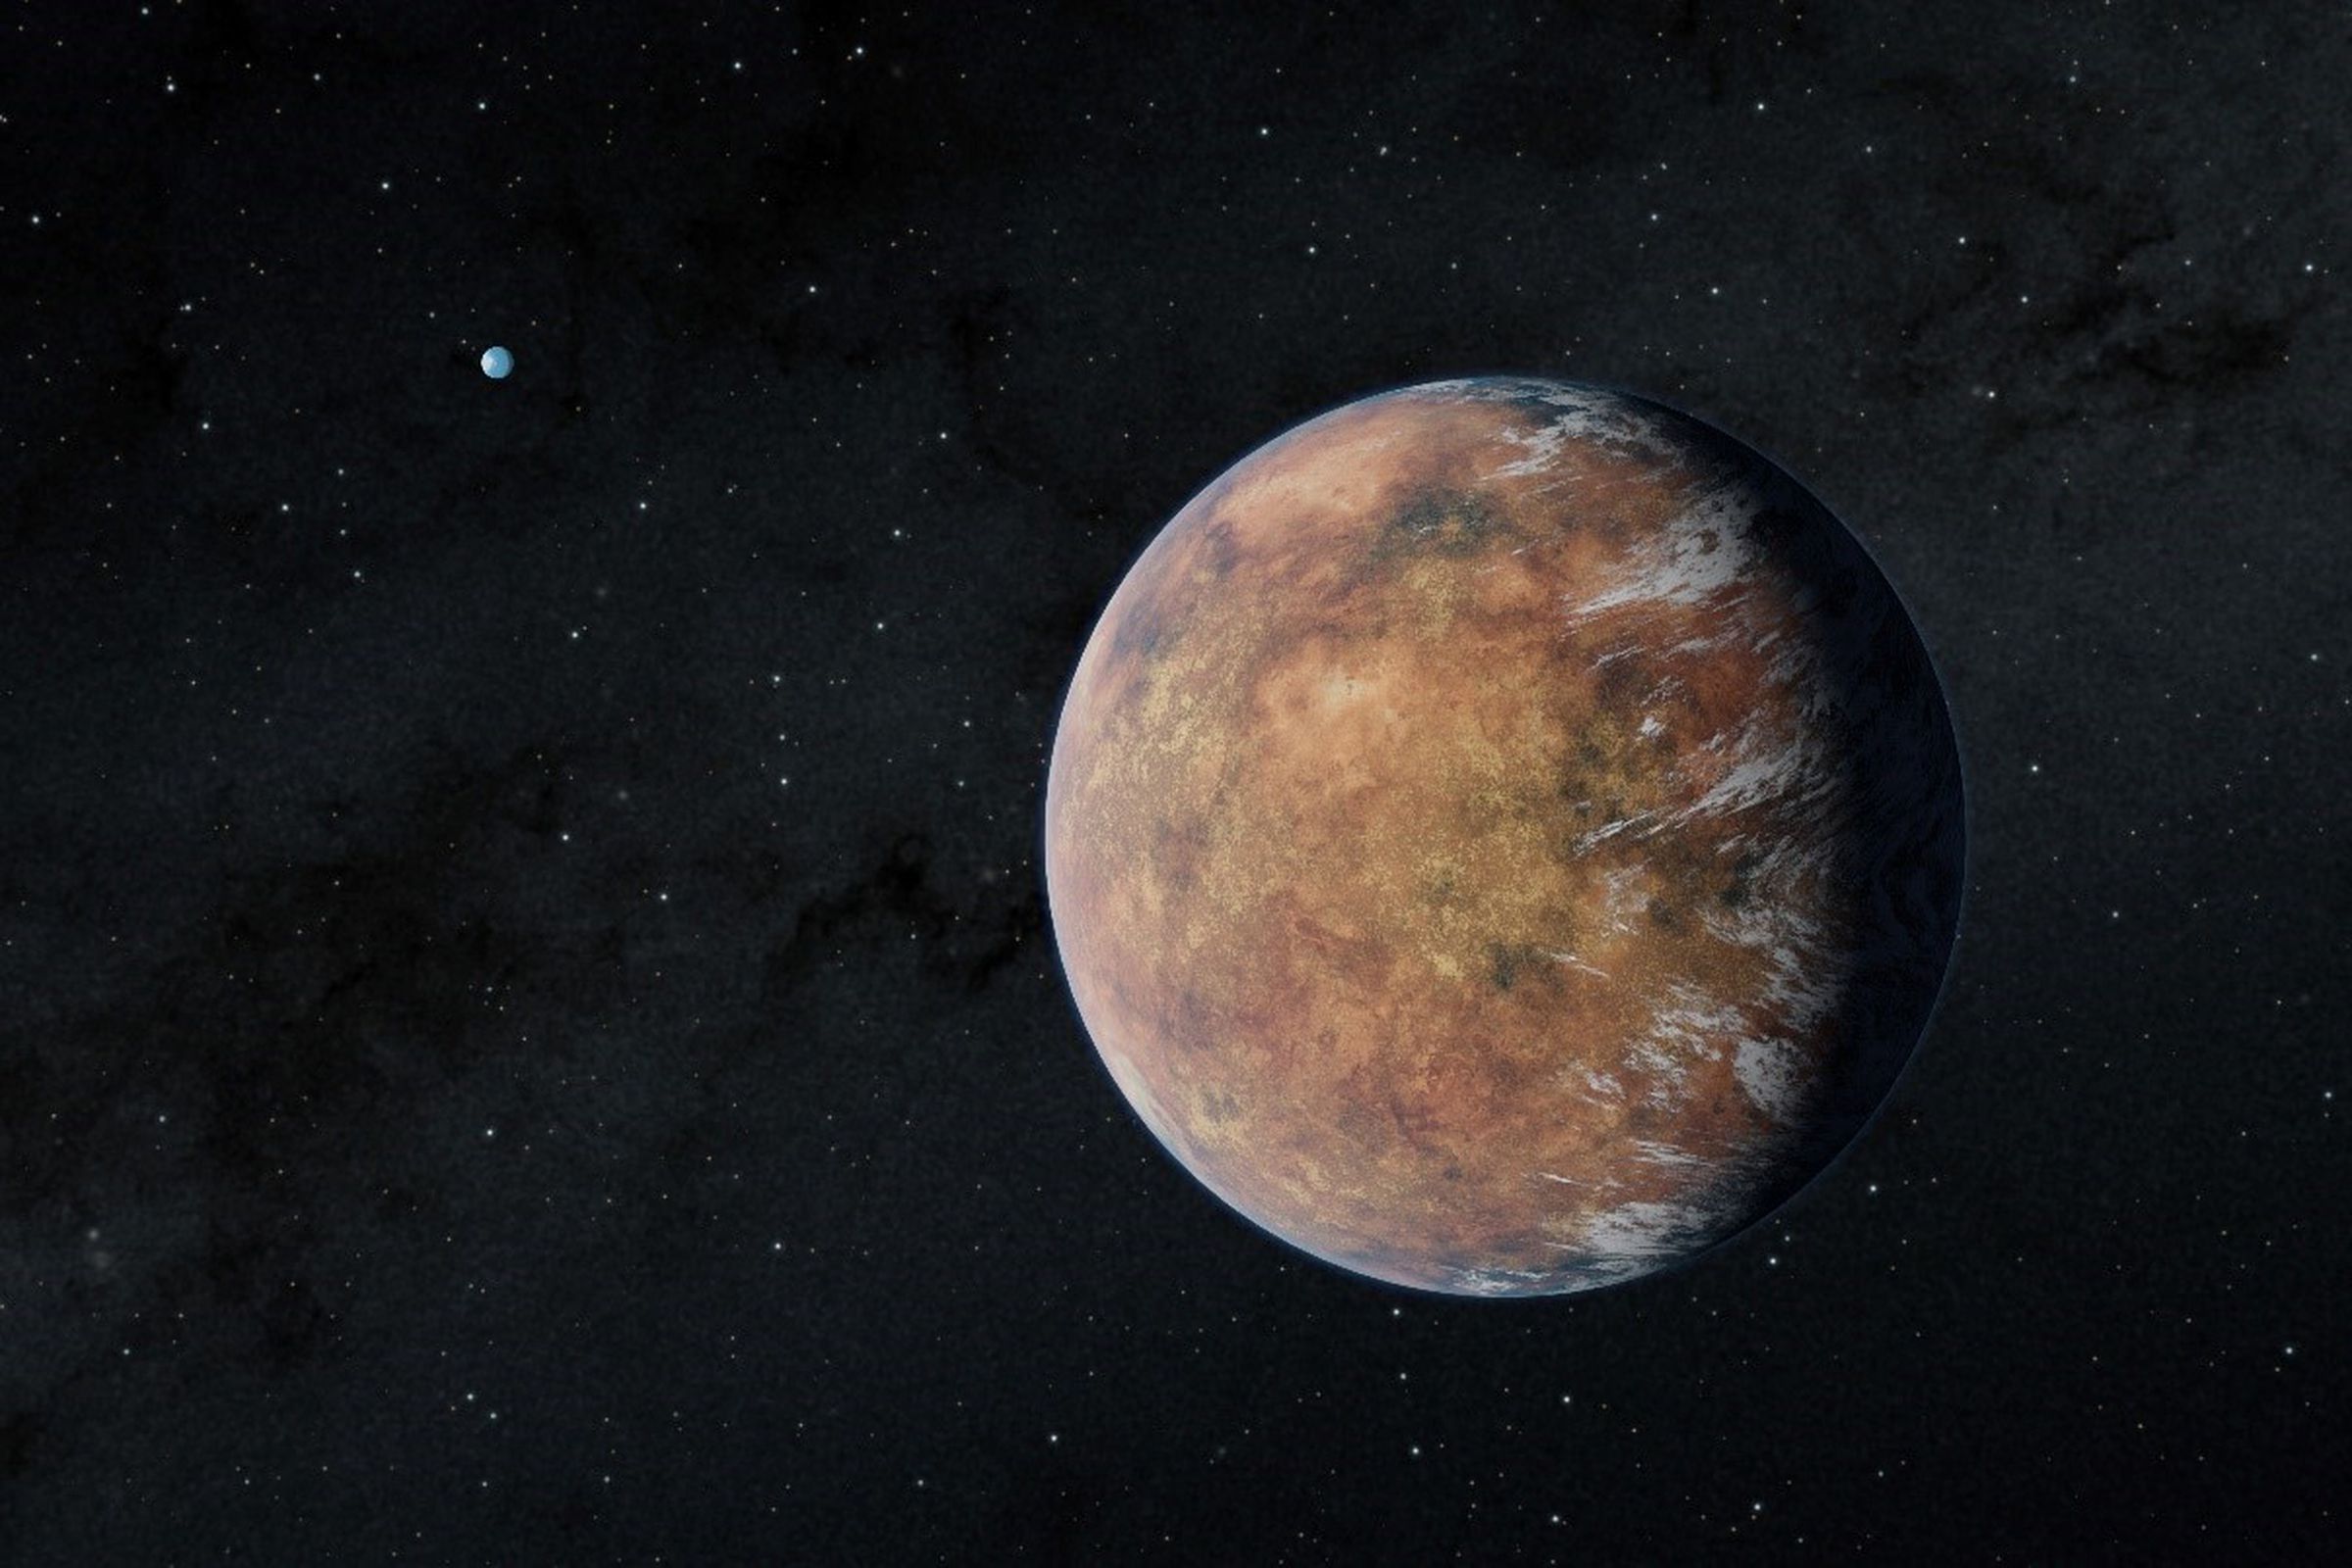 Another Earth-size exoplanet discovered in habitable zone of nearby star